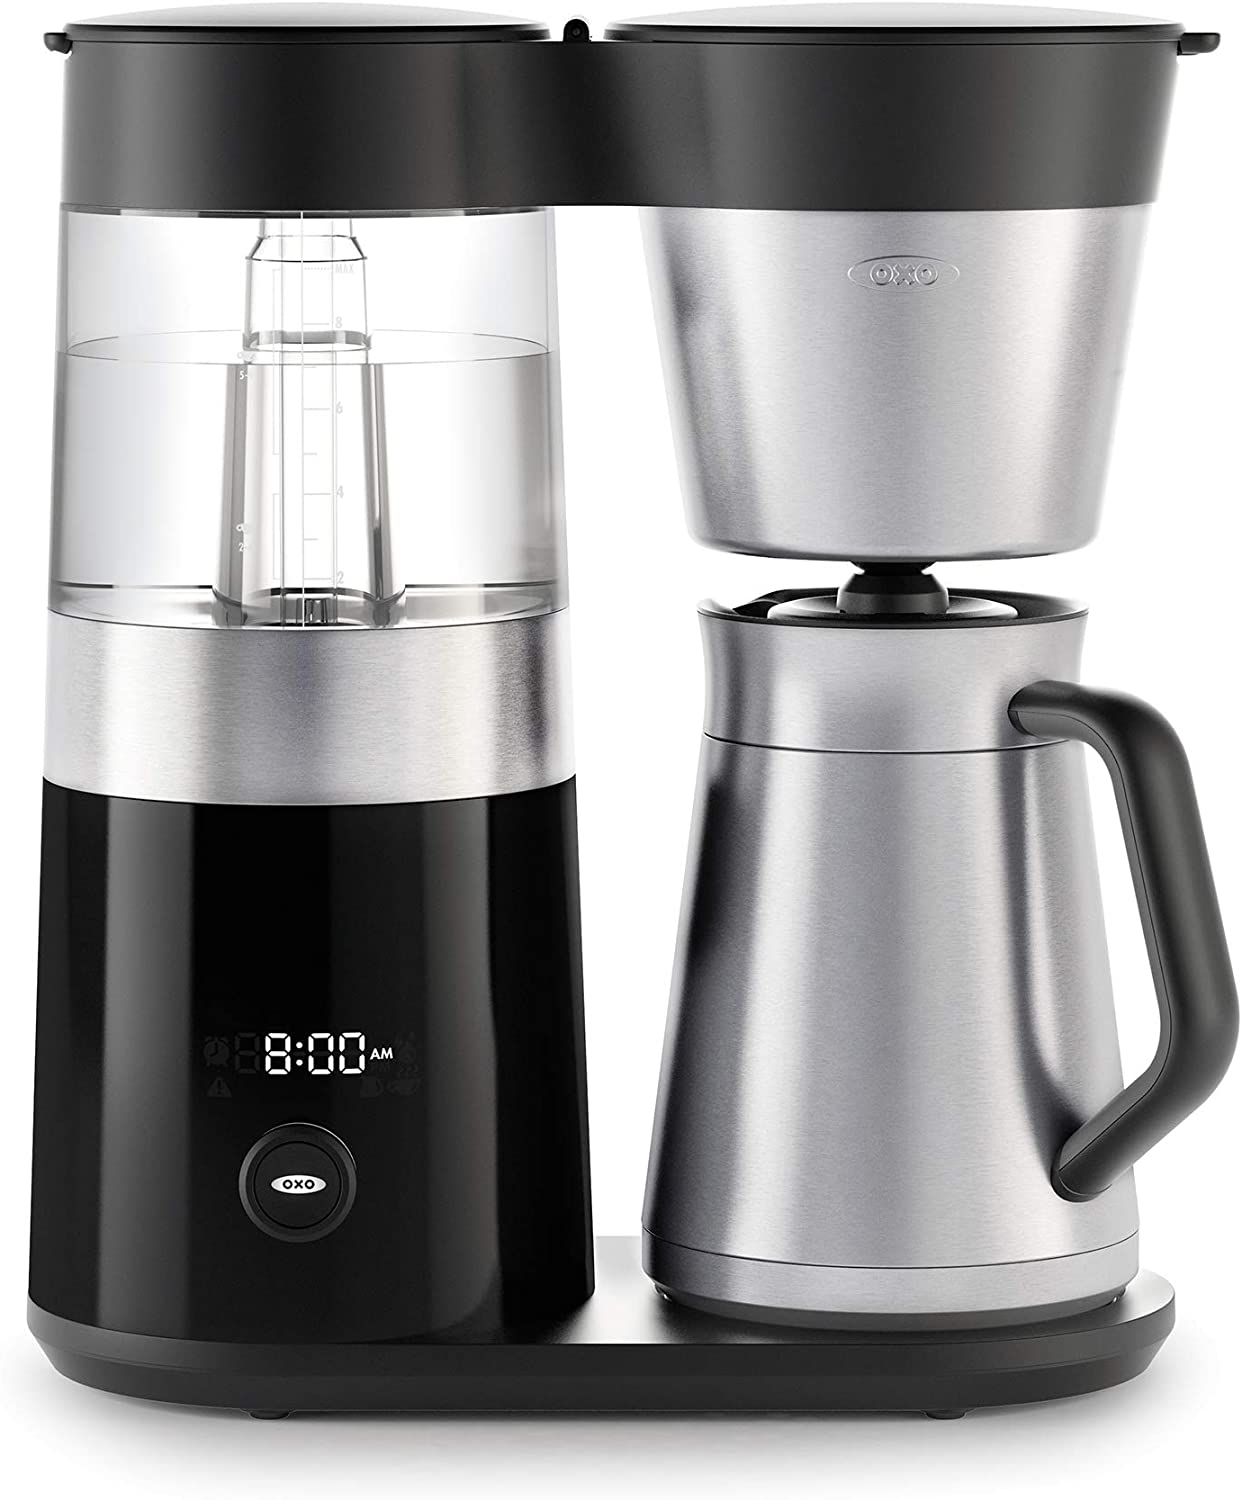 OXO BREW 9 Cup Coffee Maker